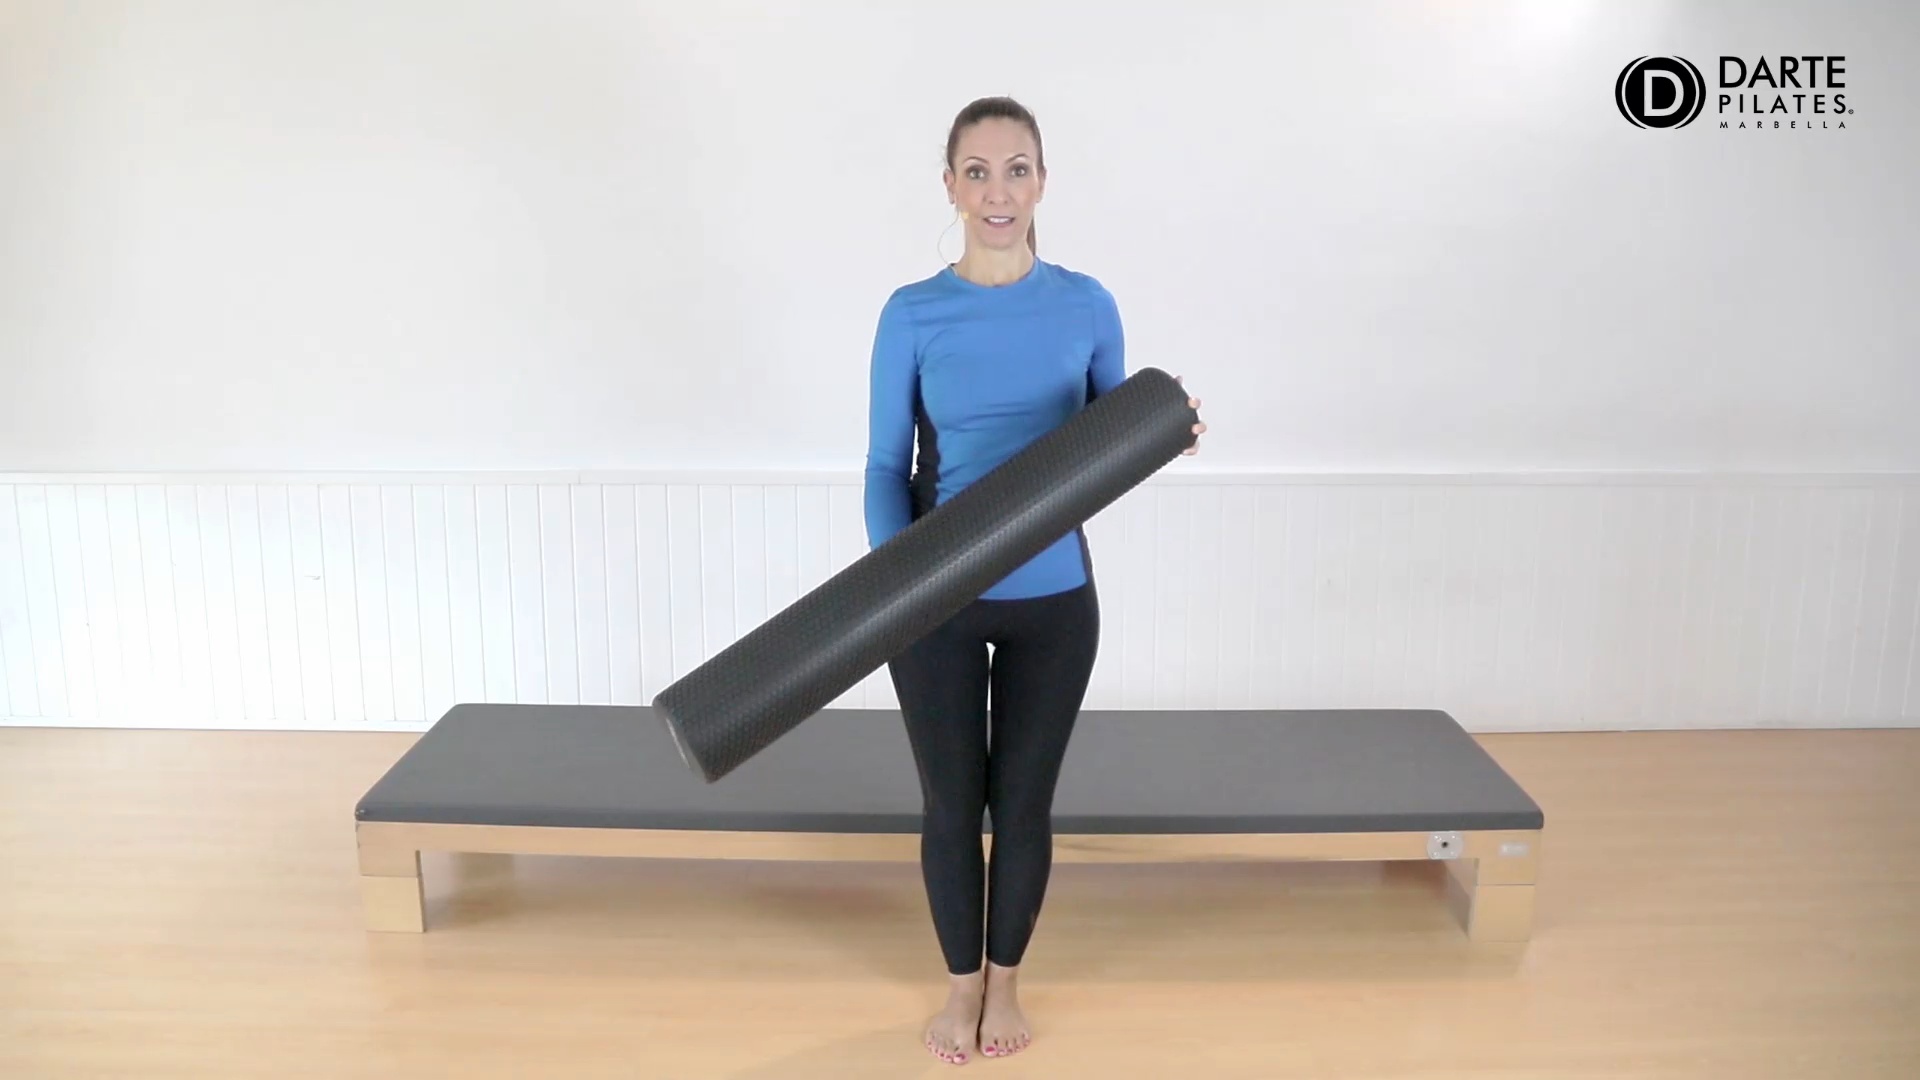 Tension release routine with myofascial roller massage